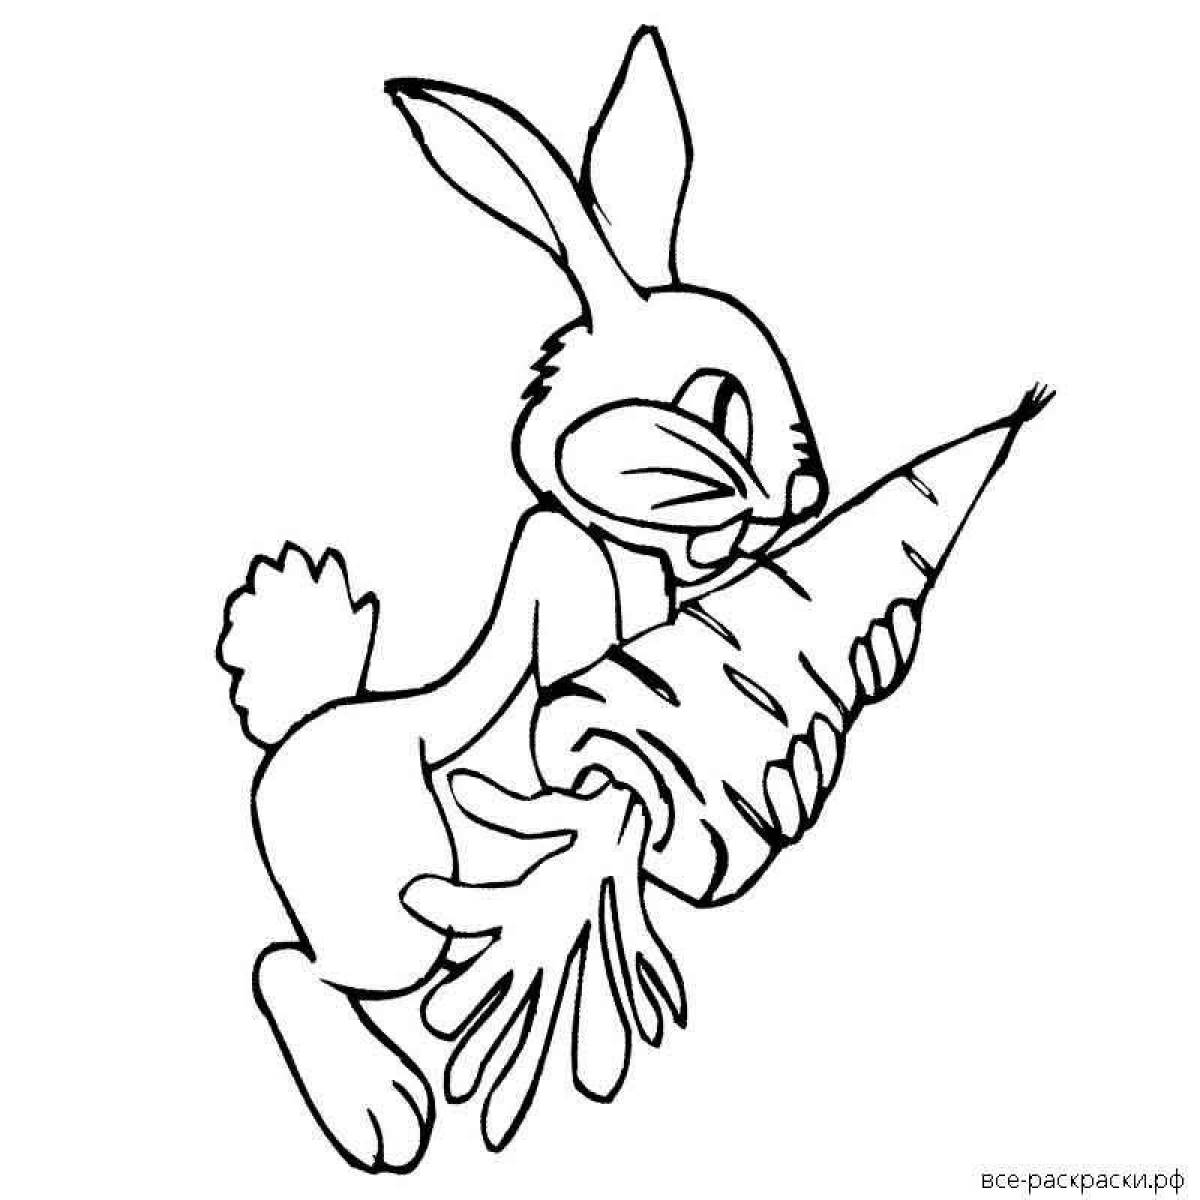 Coloring page witty rabbit with carrots